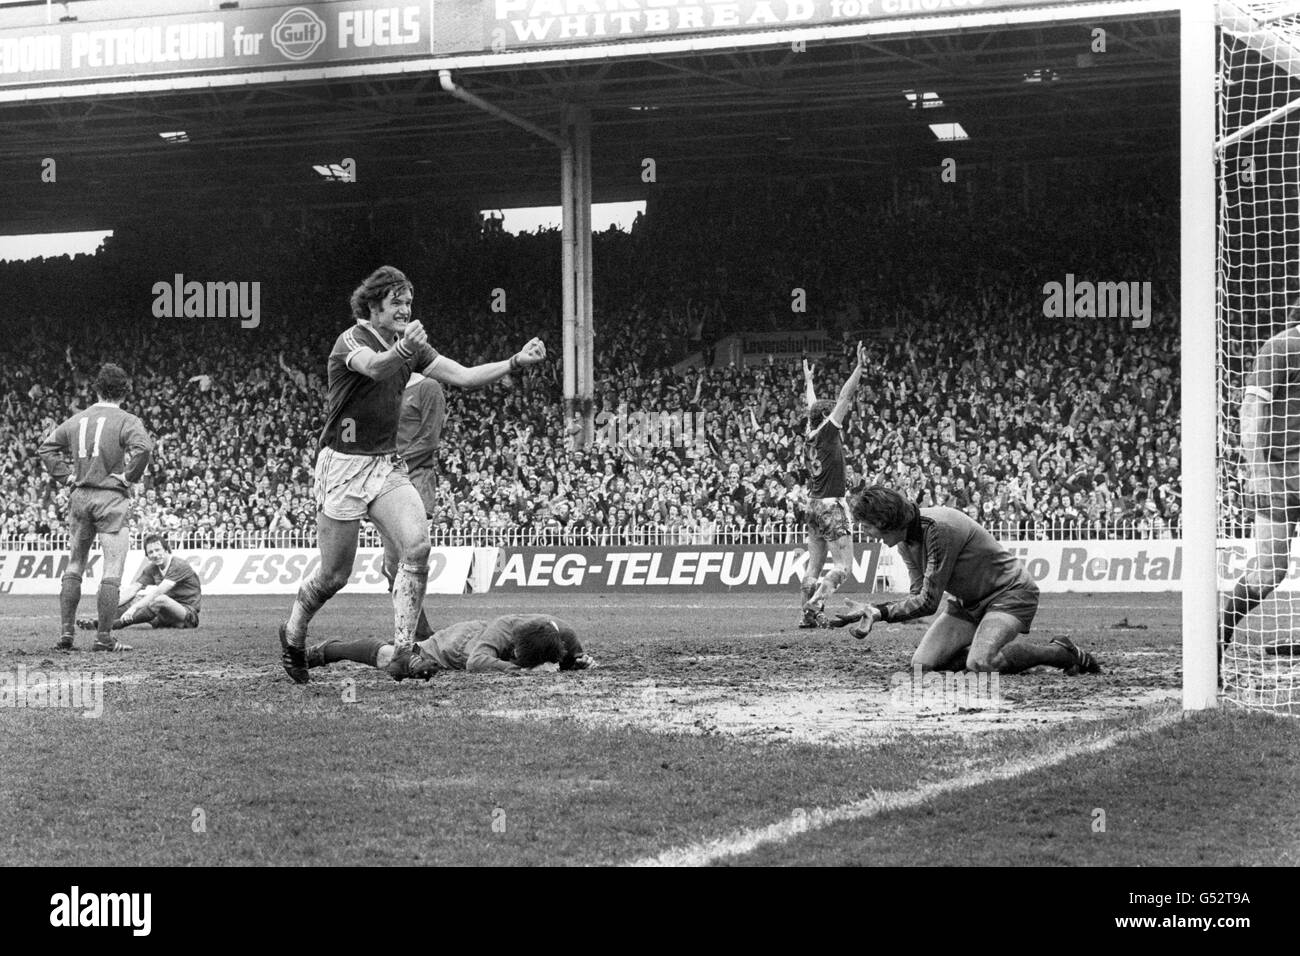 Soccer - FA Cup - Semi Final - Liverpool v Everton - Maine Road, Manchester. Everton's Mick Lyons (l) shows his delight after teammate Duncan McKenzie had equalised. The game ended 2-2 and went to a replay. Stock Photo